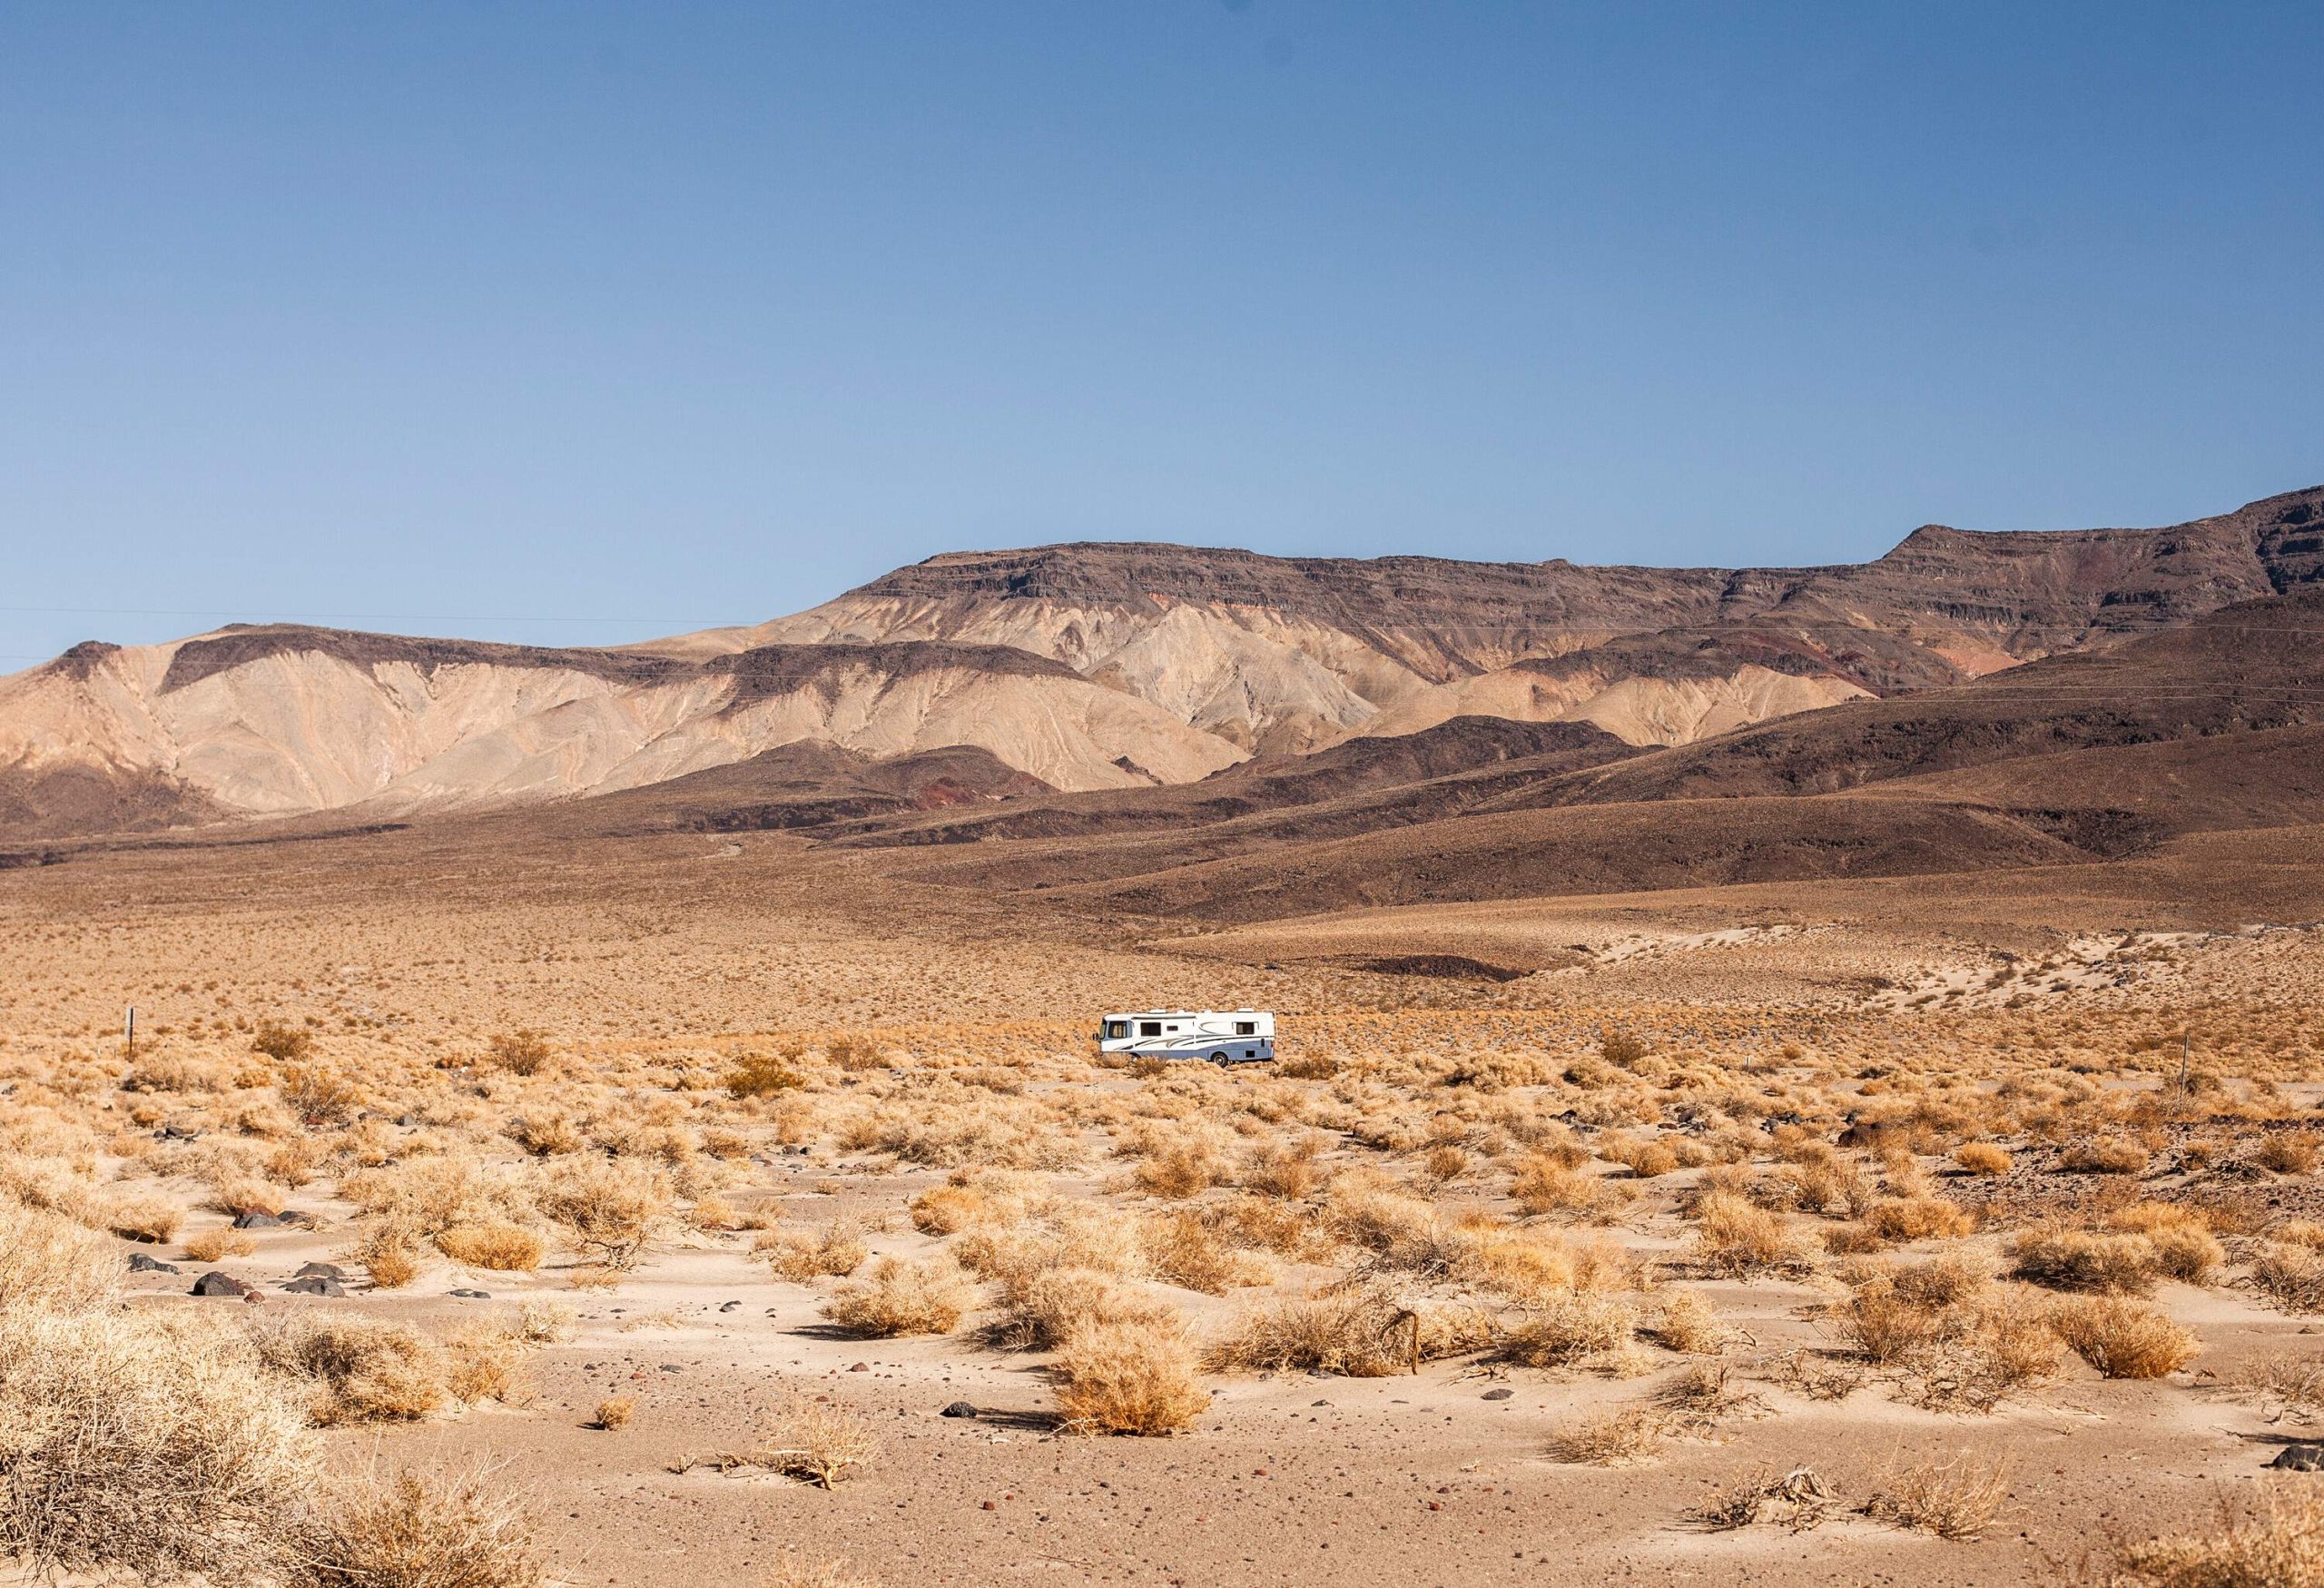 A camper van travelling across a desert with distant views of mountains.